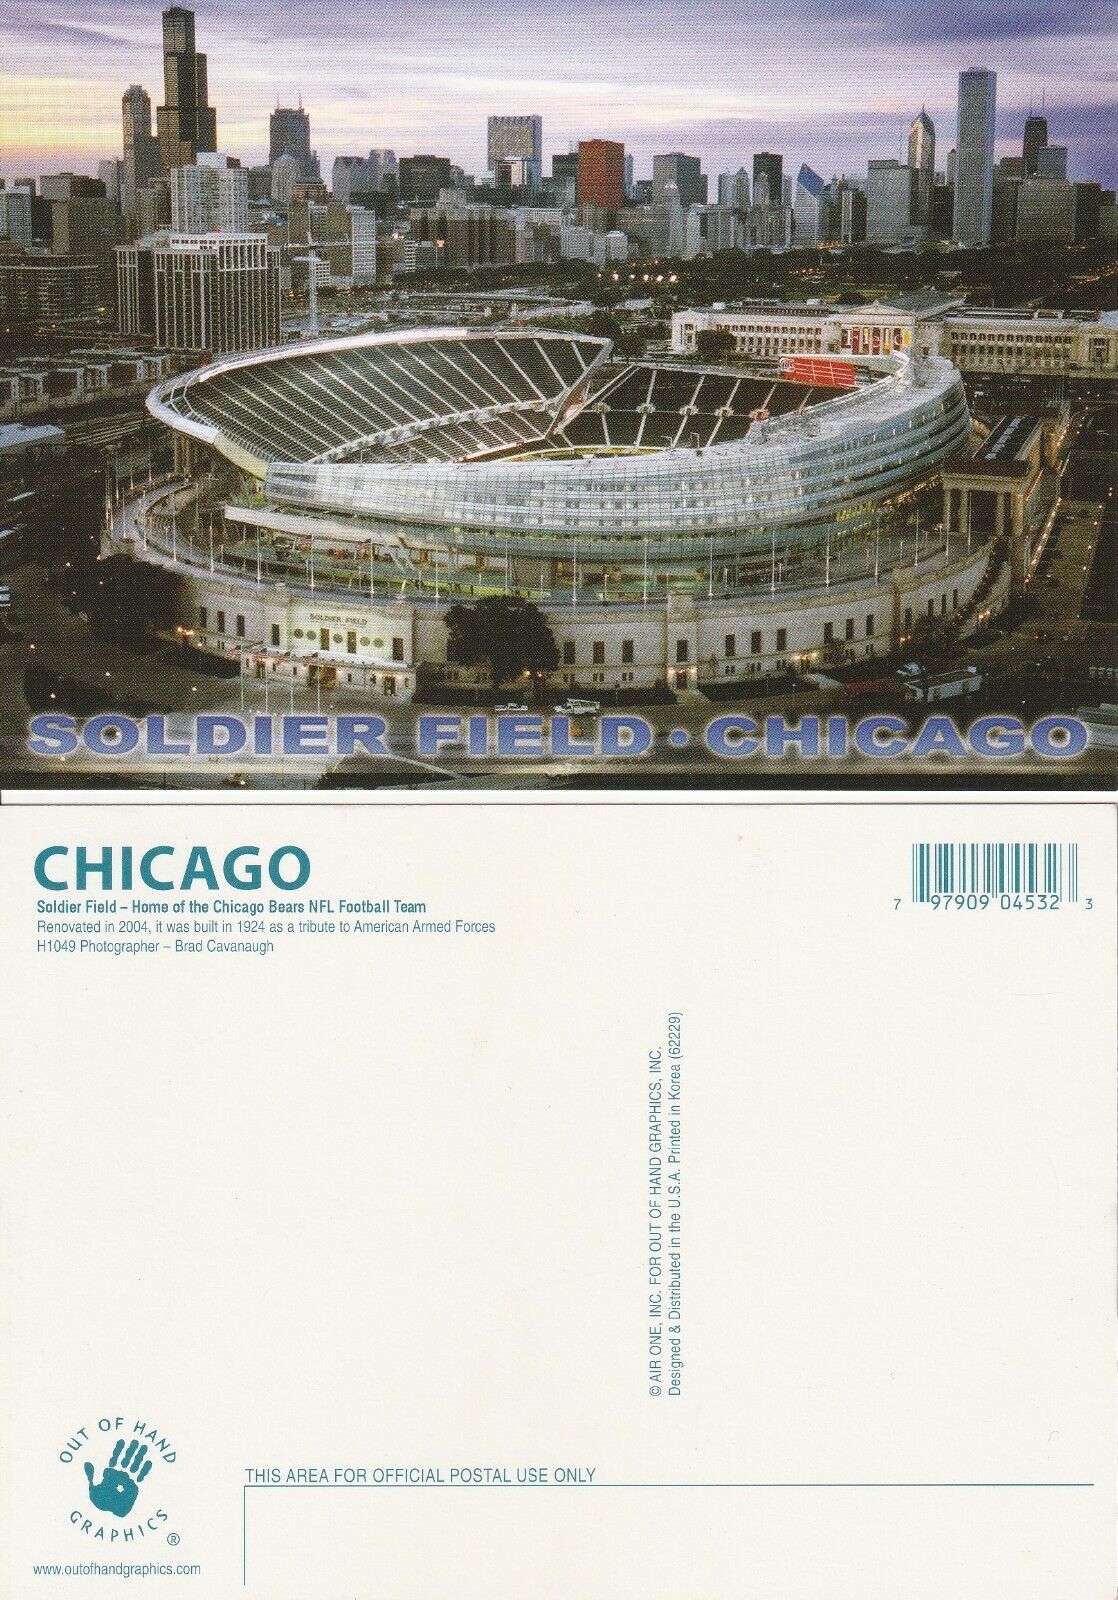 NFL Chicago Bears New Soldier Field Football Stadium Postcard - 1st Issue